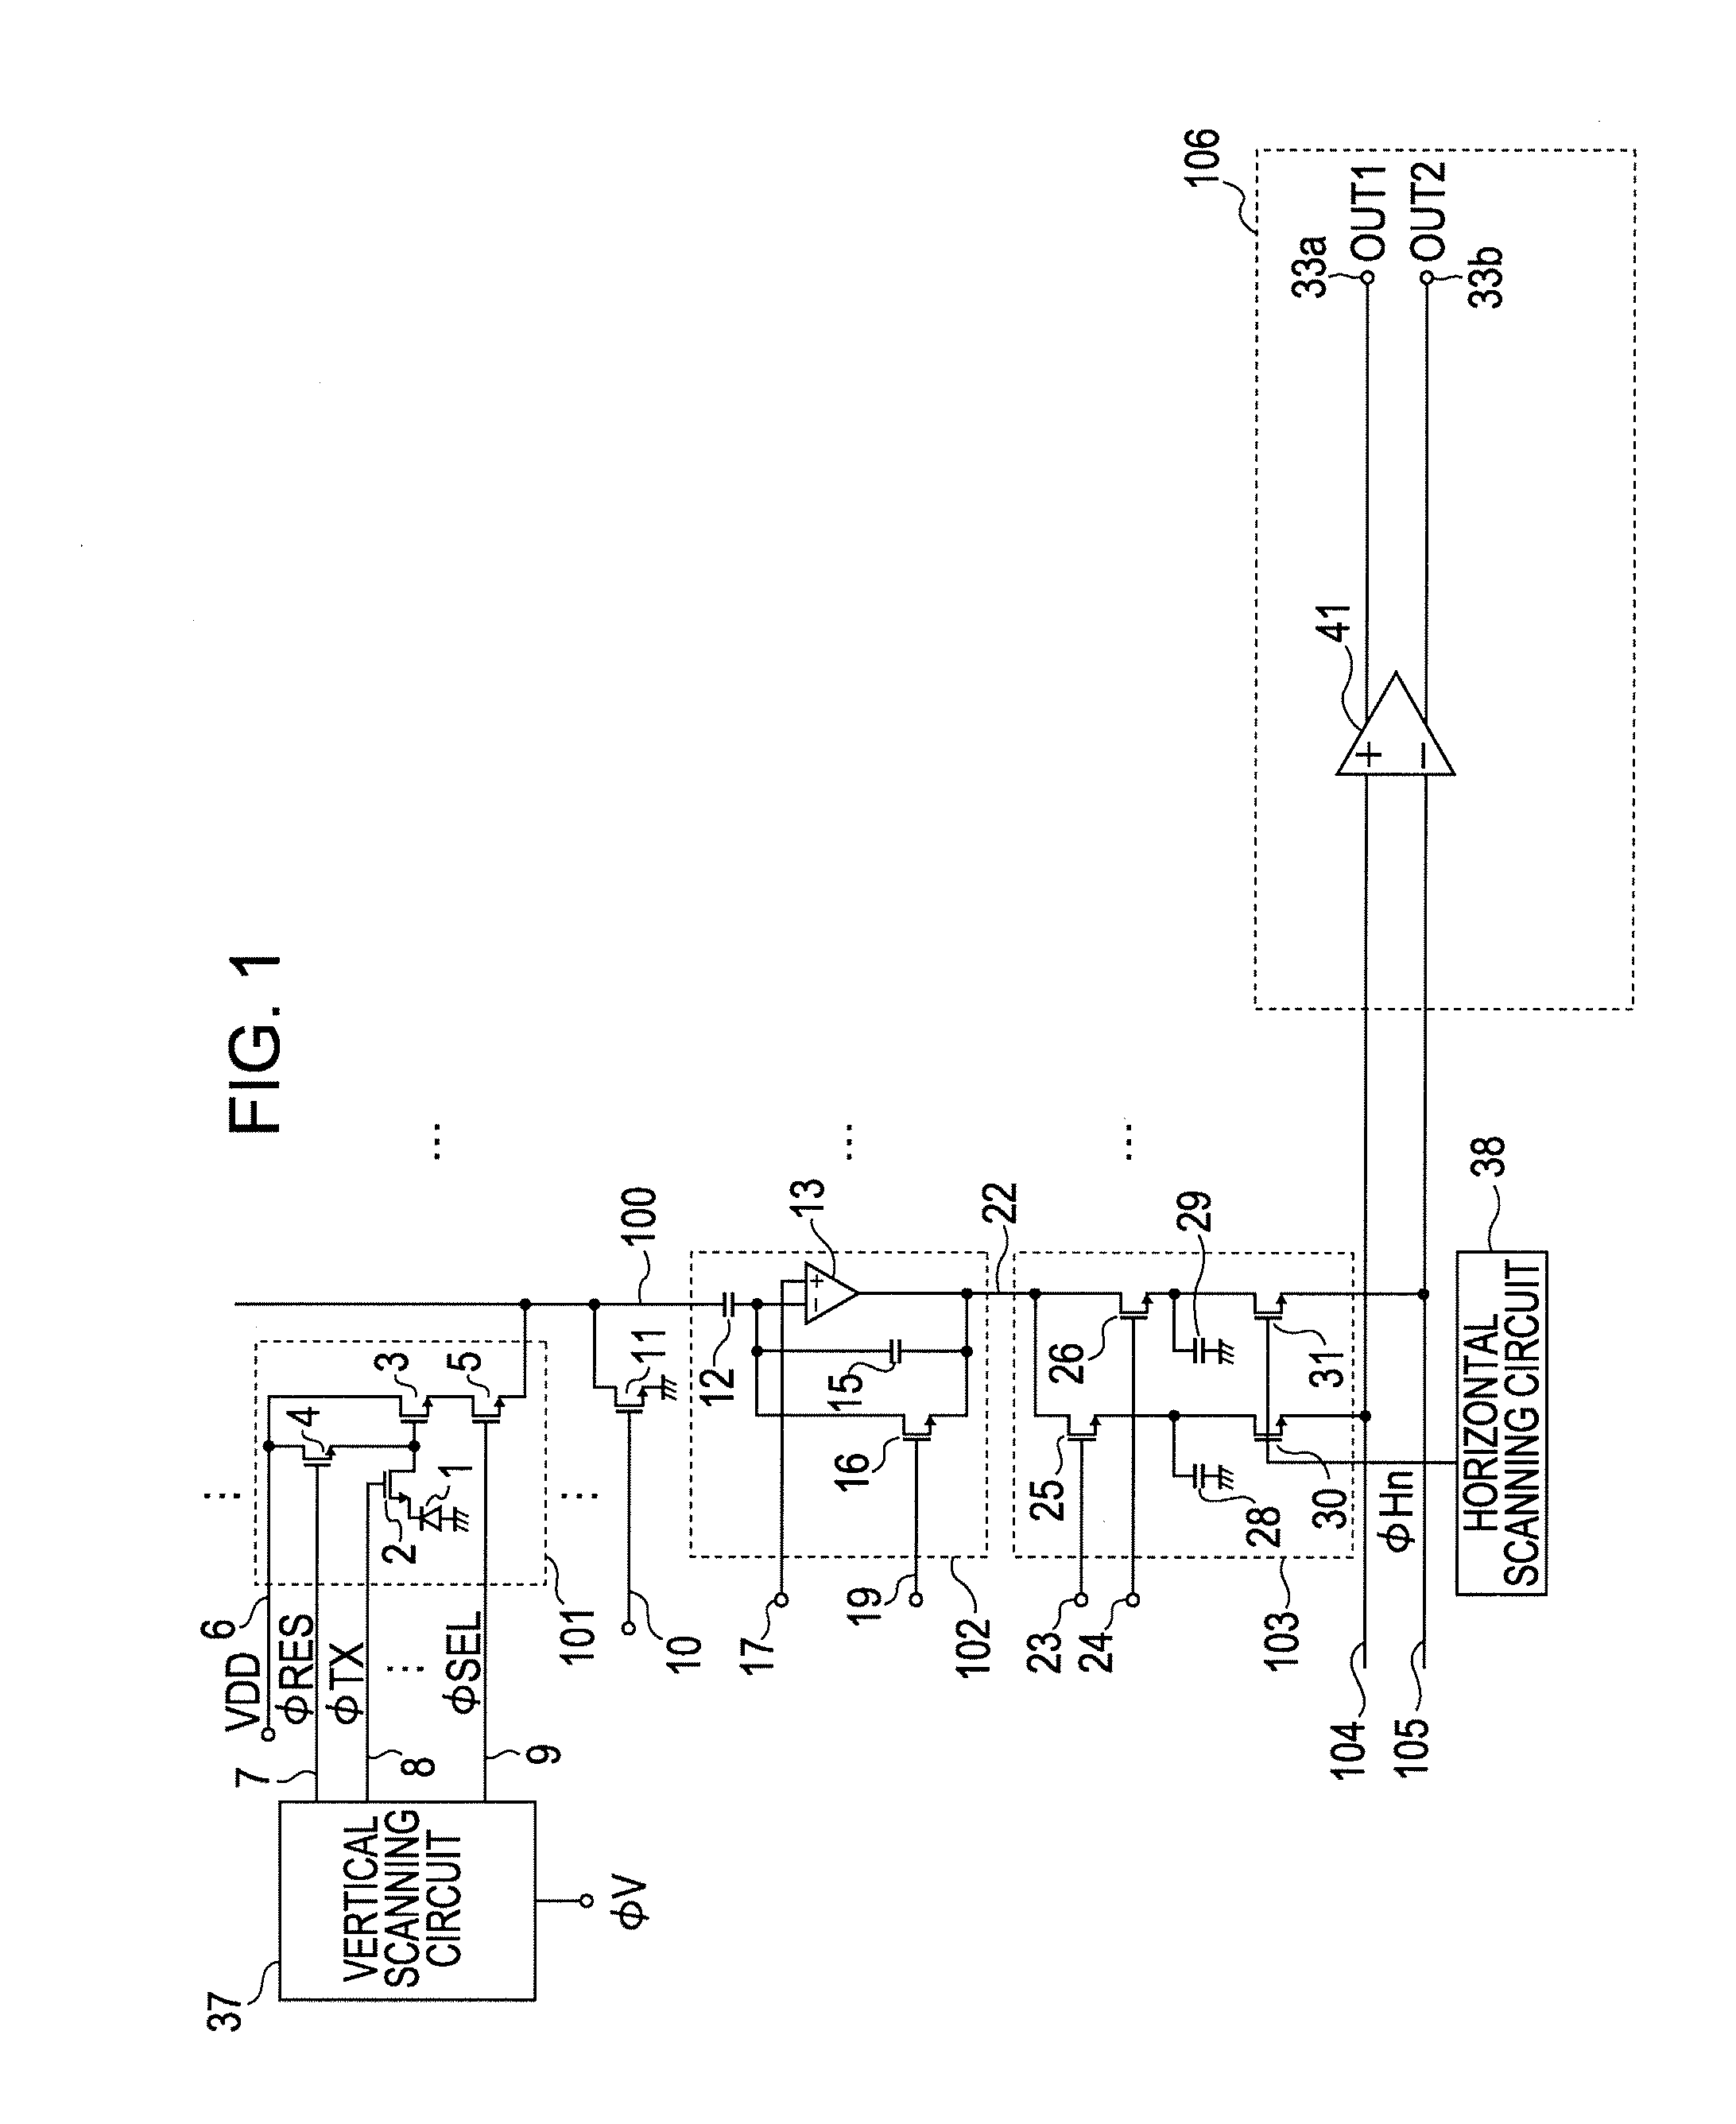 Photoelectric conversion apparatus and image sensing system